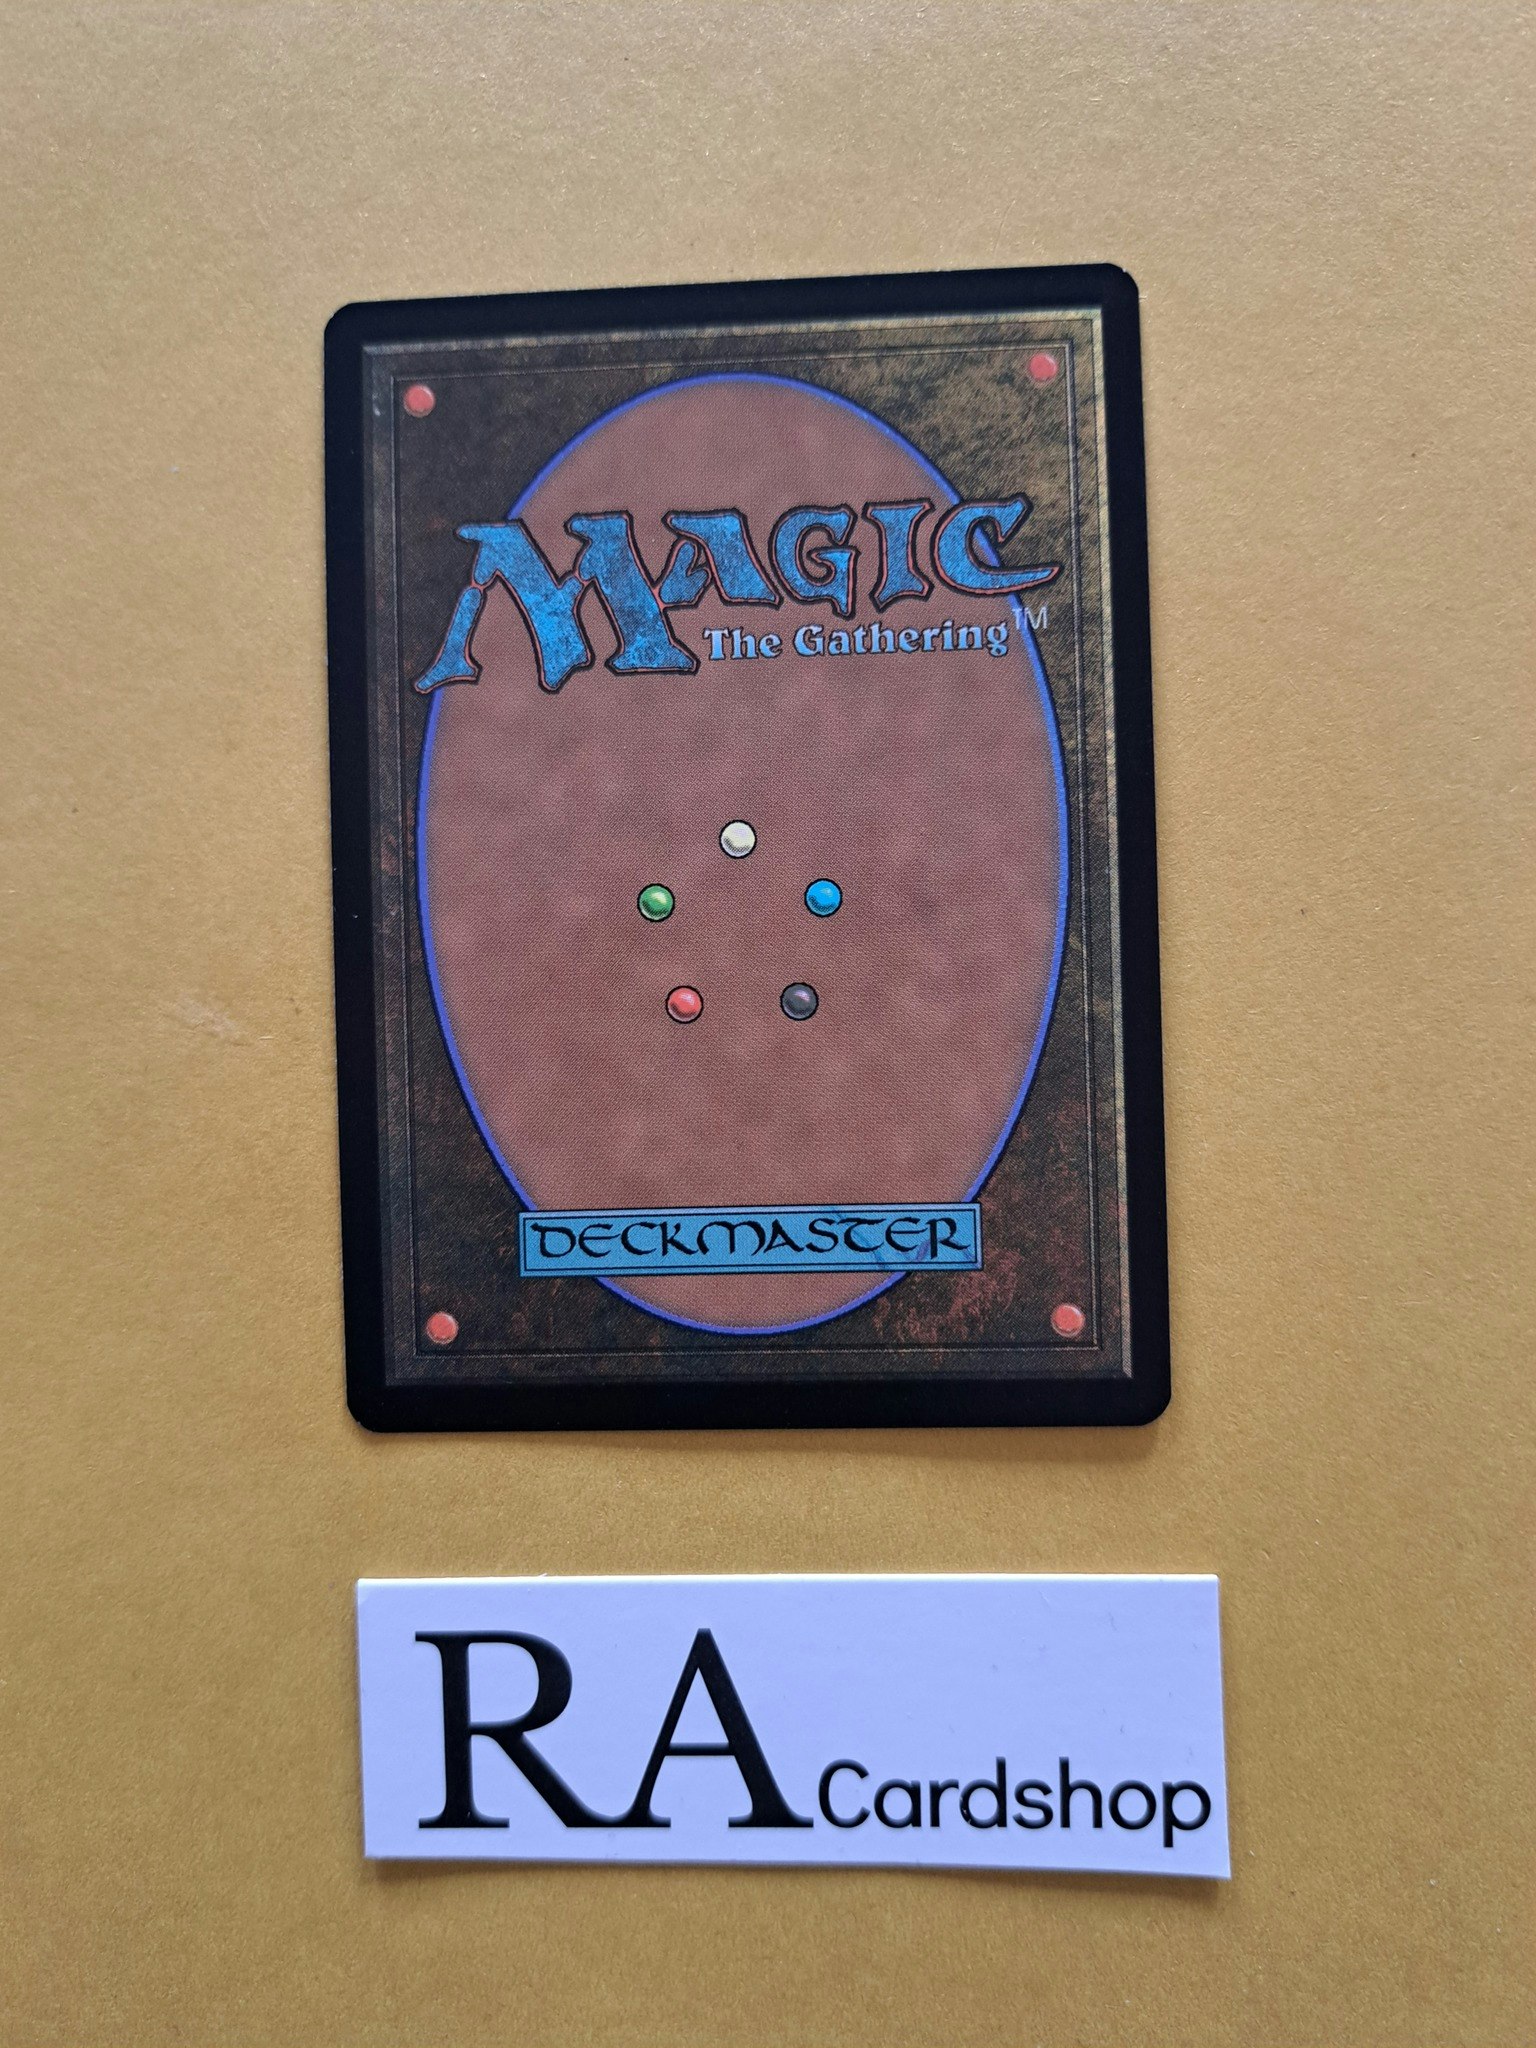 Cinderslash Ravager Uncommon 200/271 Phyrexia All Will Be One Magic the Gathering